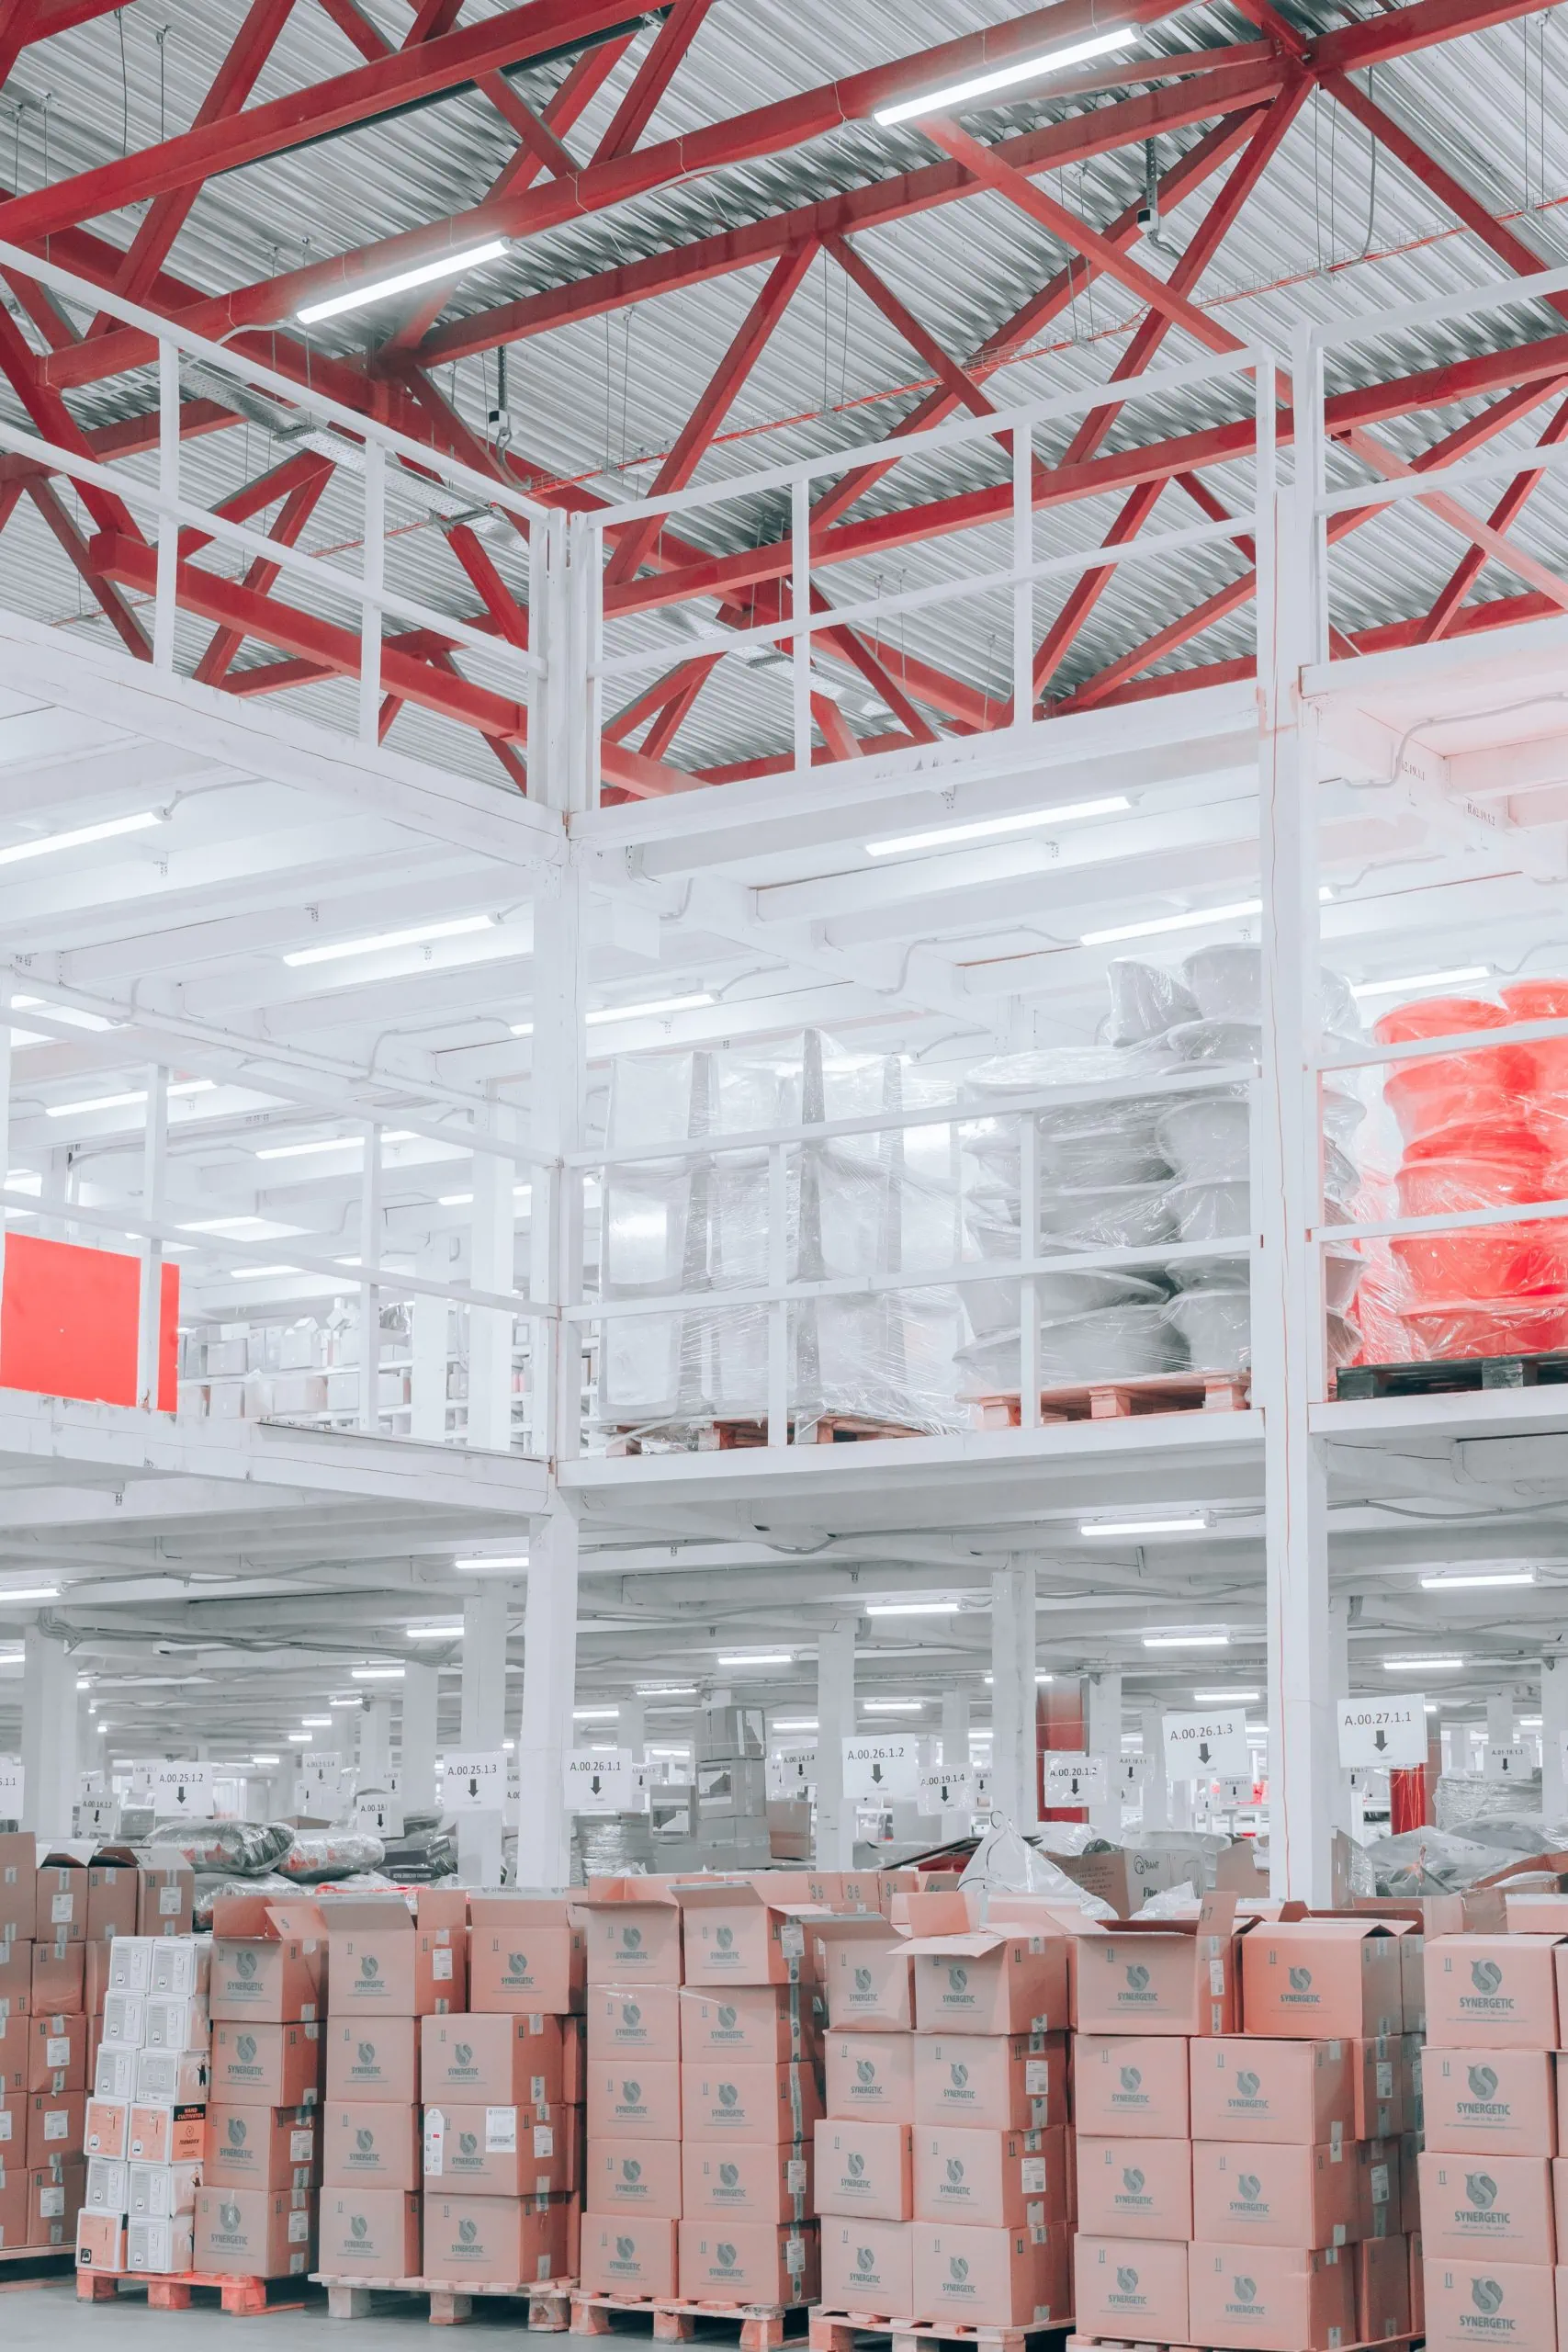 Warehouses with security cameras that zoom